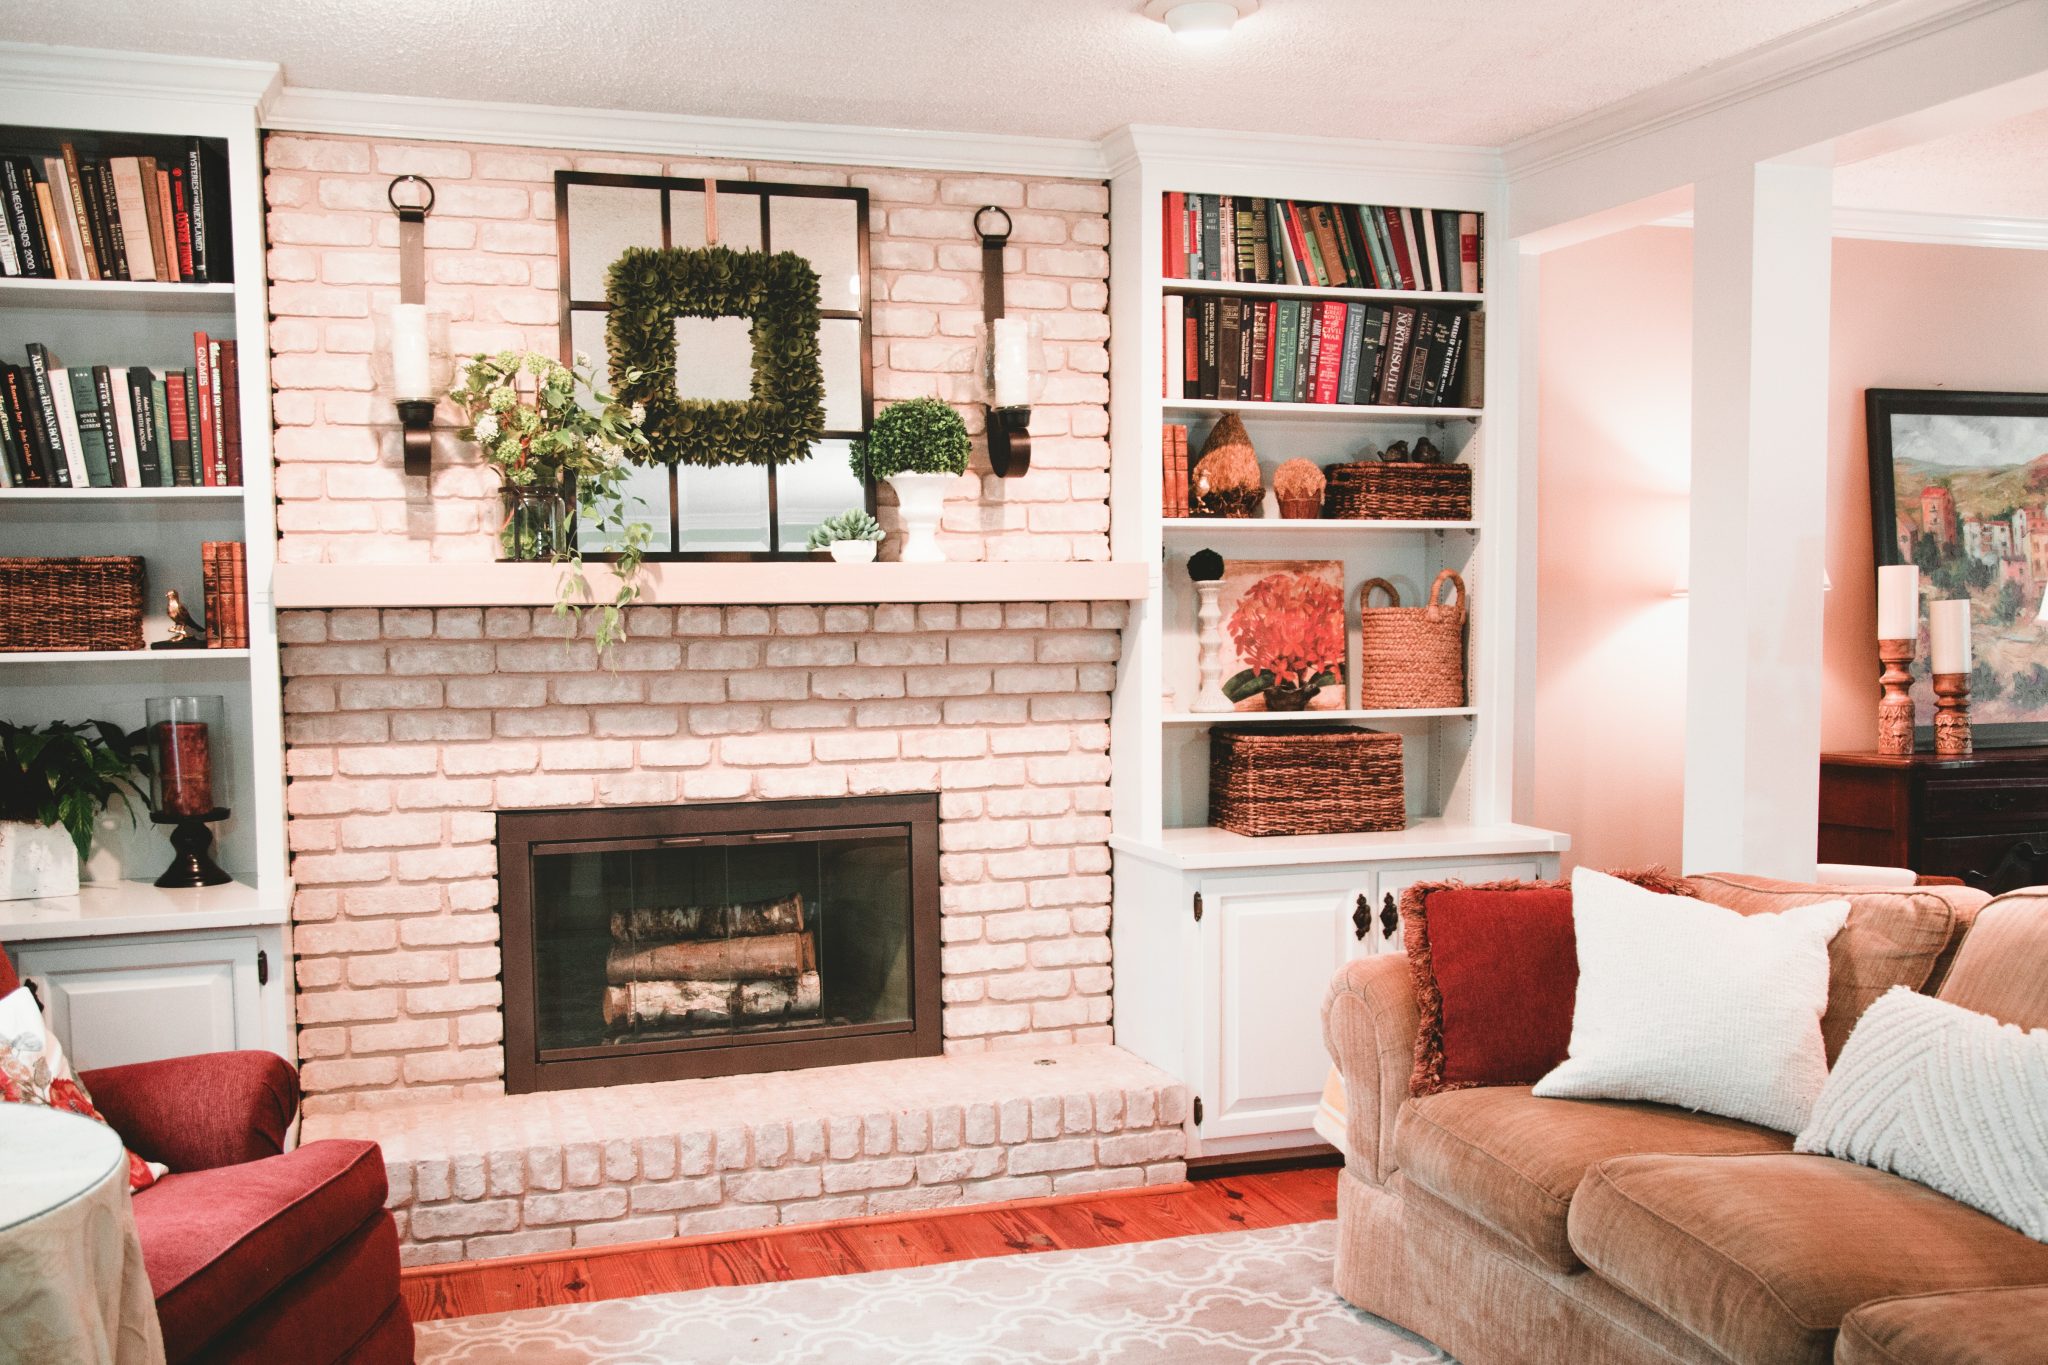 What Color Should I Paint My Brick Fireplace? - Fireplace ...